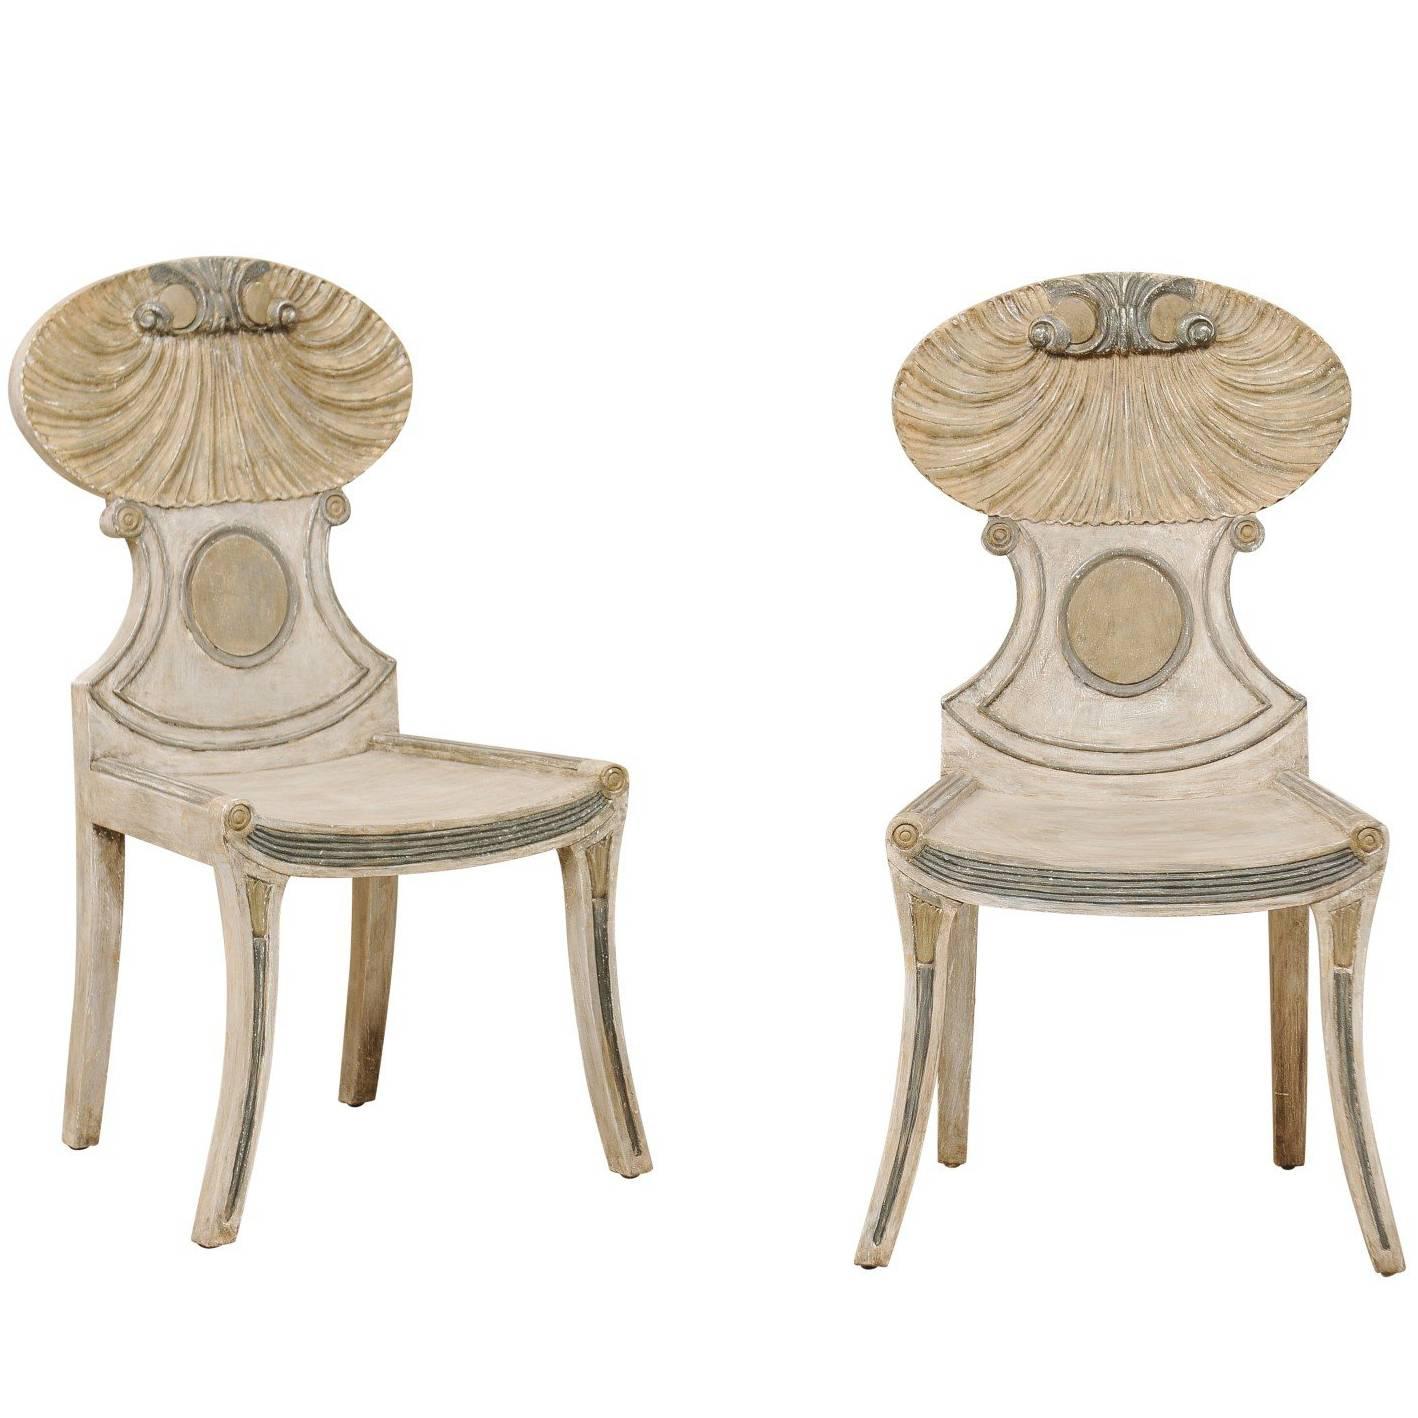 Pair of Vintage Grotto Painted Beige Wood Chairs with Carved Shell Motifs